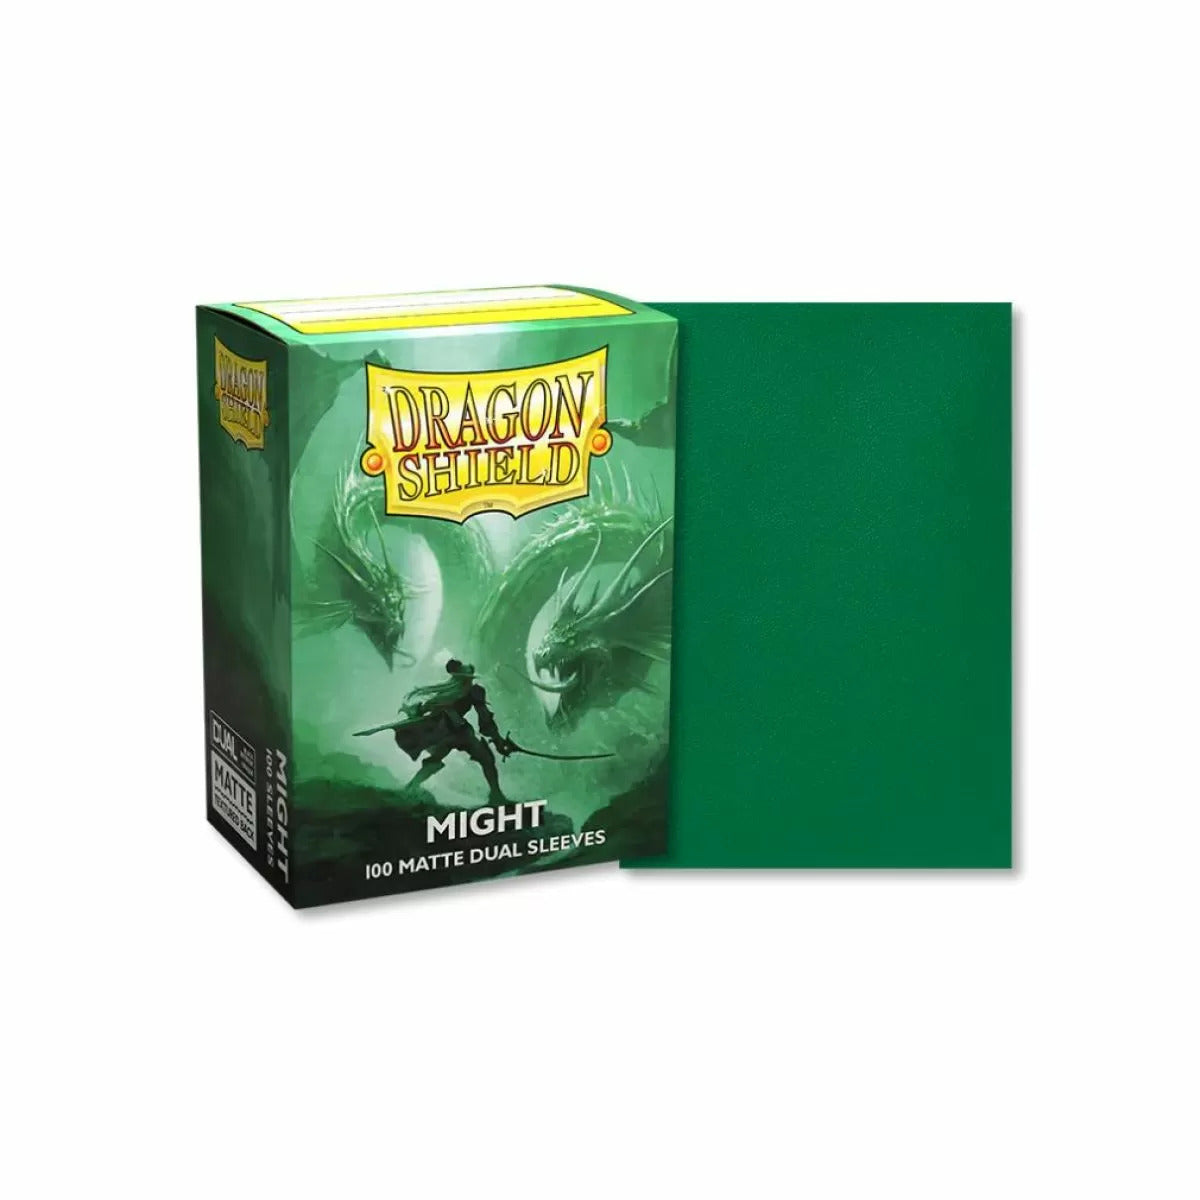 Dragon Shield Standard size Matte Dual Sleeves - Might (100 Sleeves)